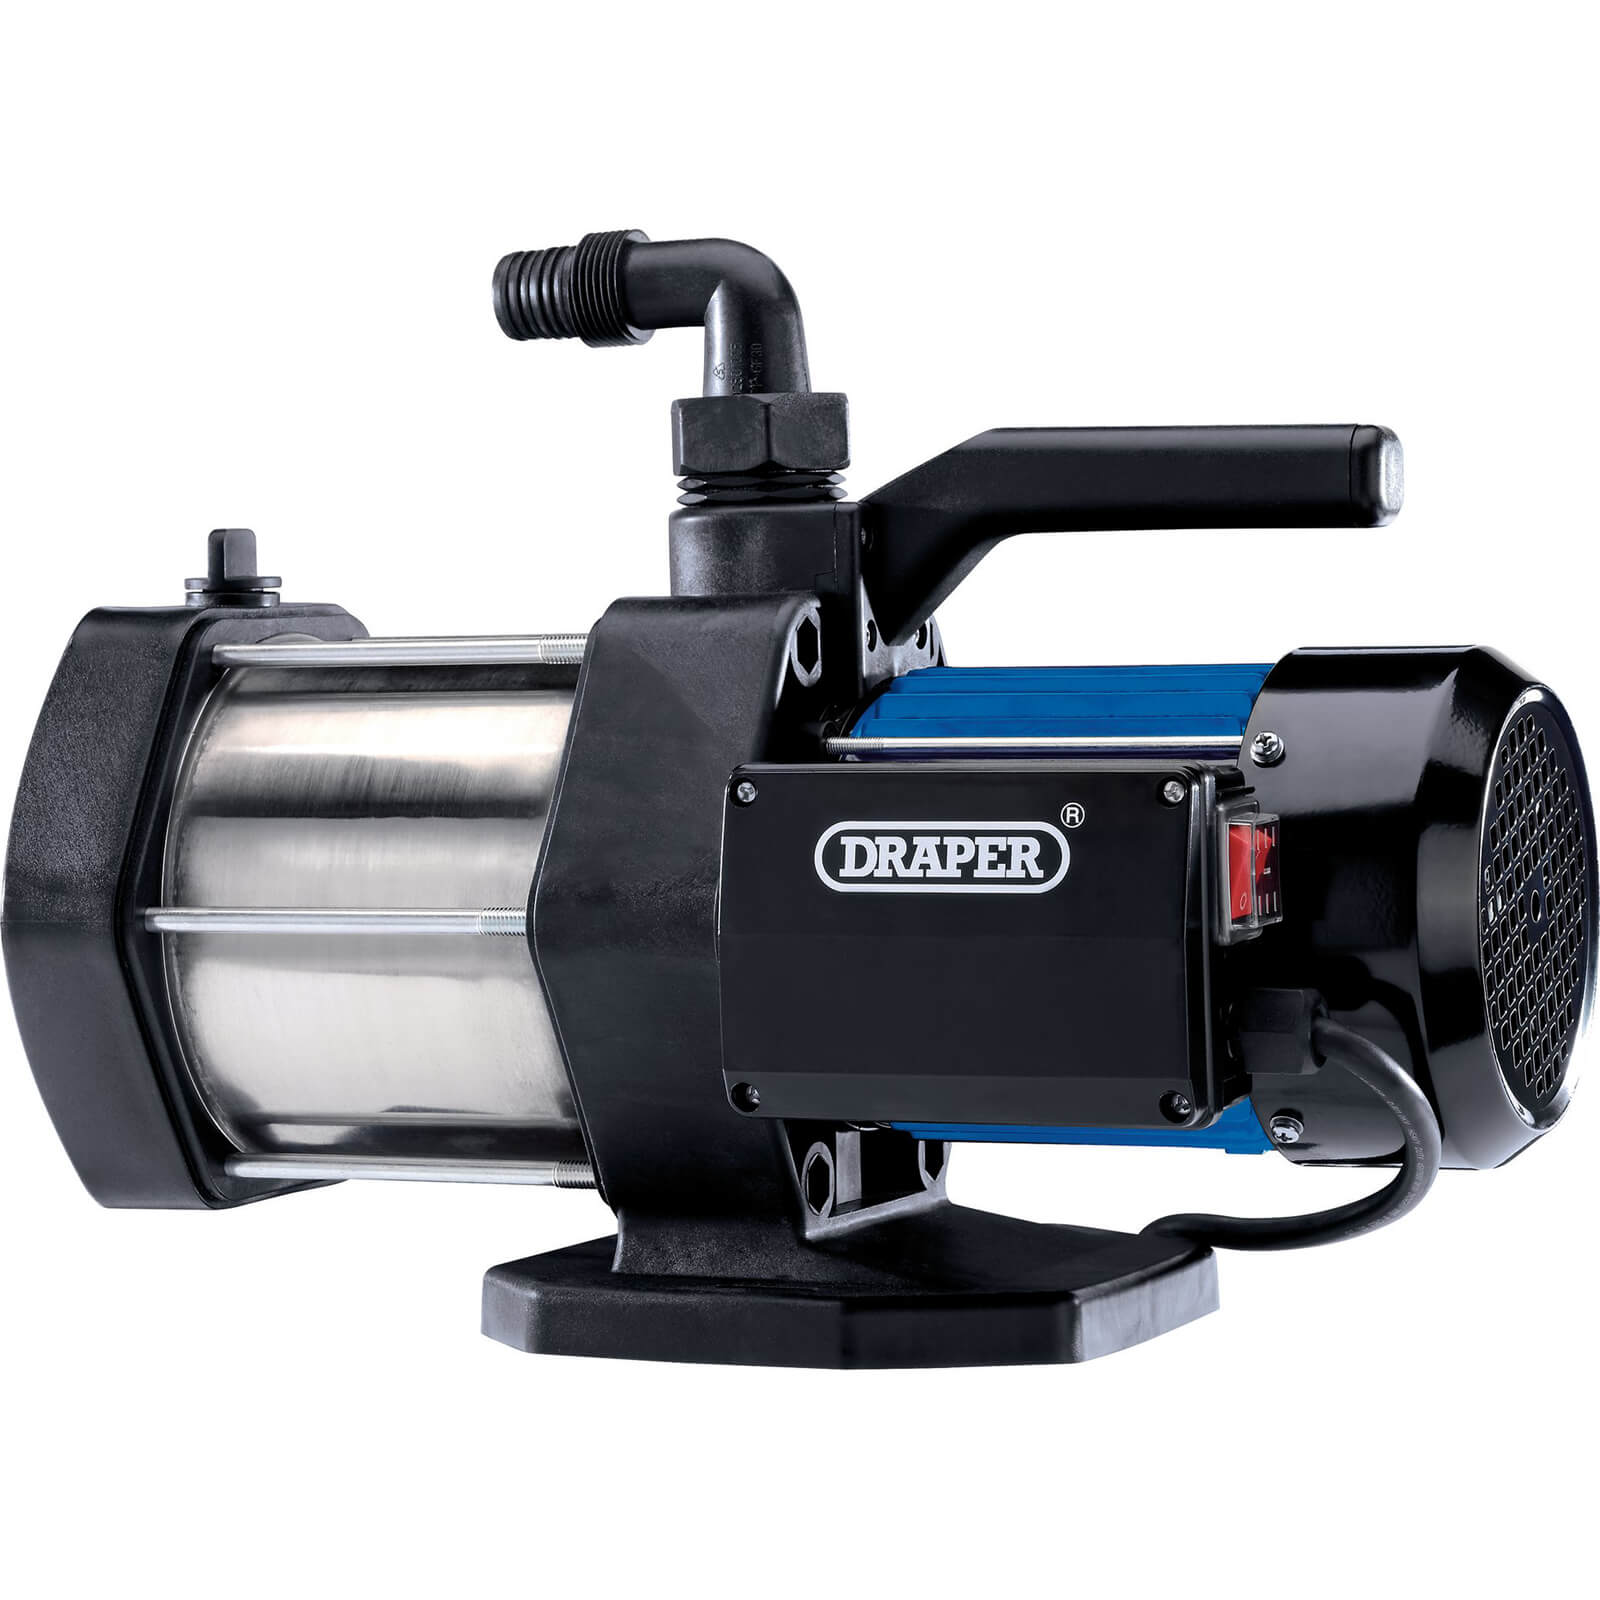 Image of Draper SP90MS Multi Stage Surface Water Pump 240v